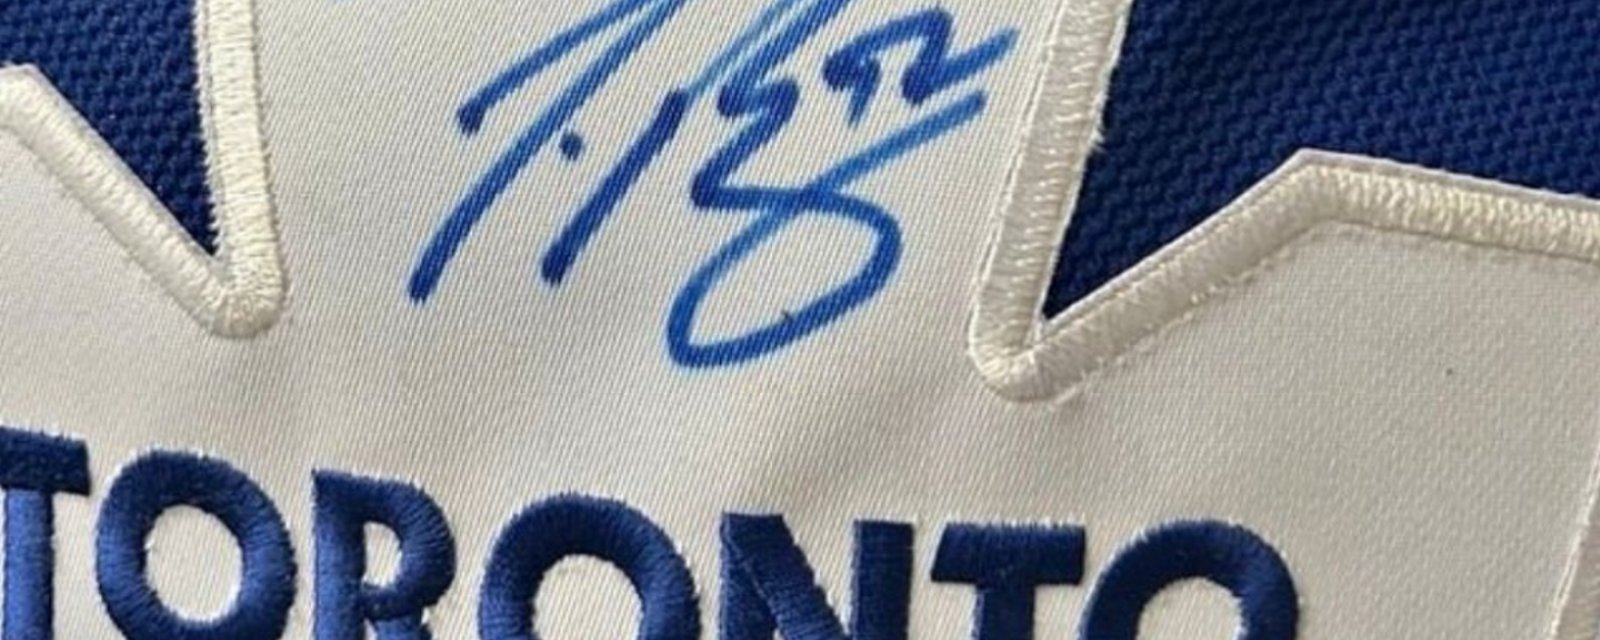 Tyler Bozak roasted over autographed jersey located online.